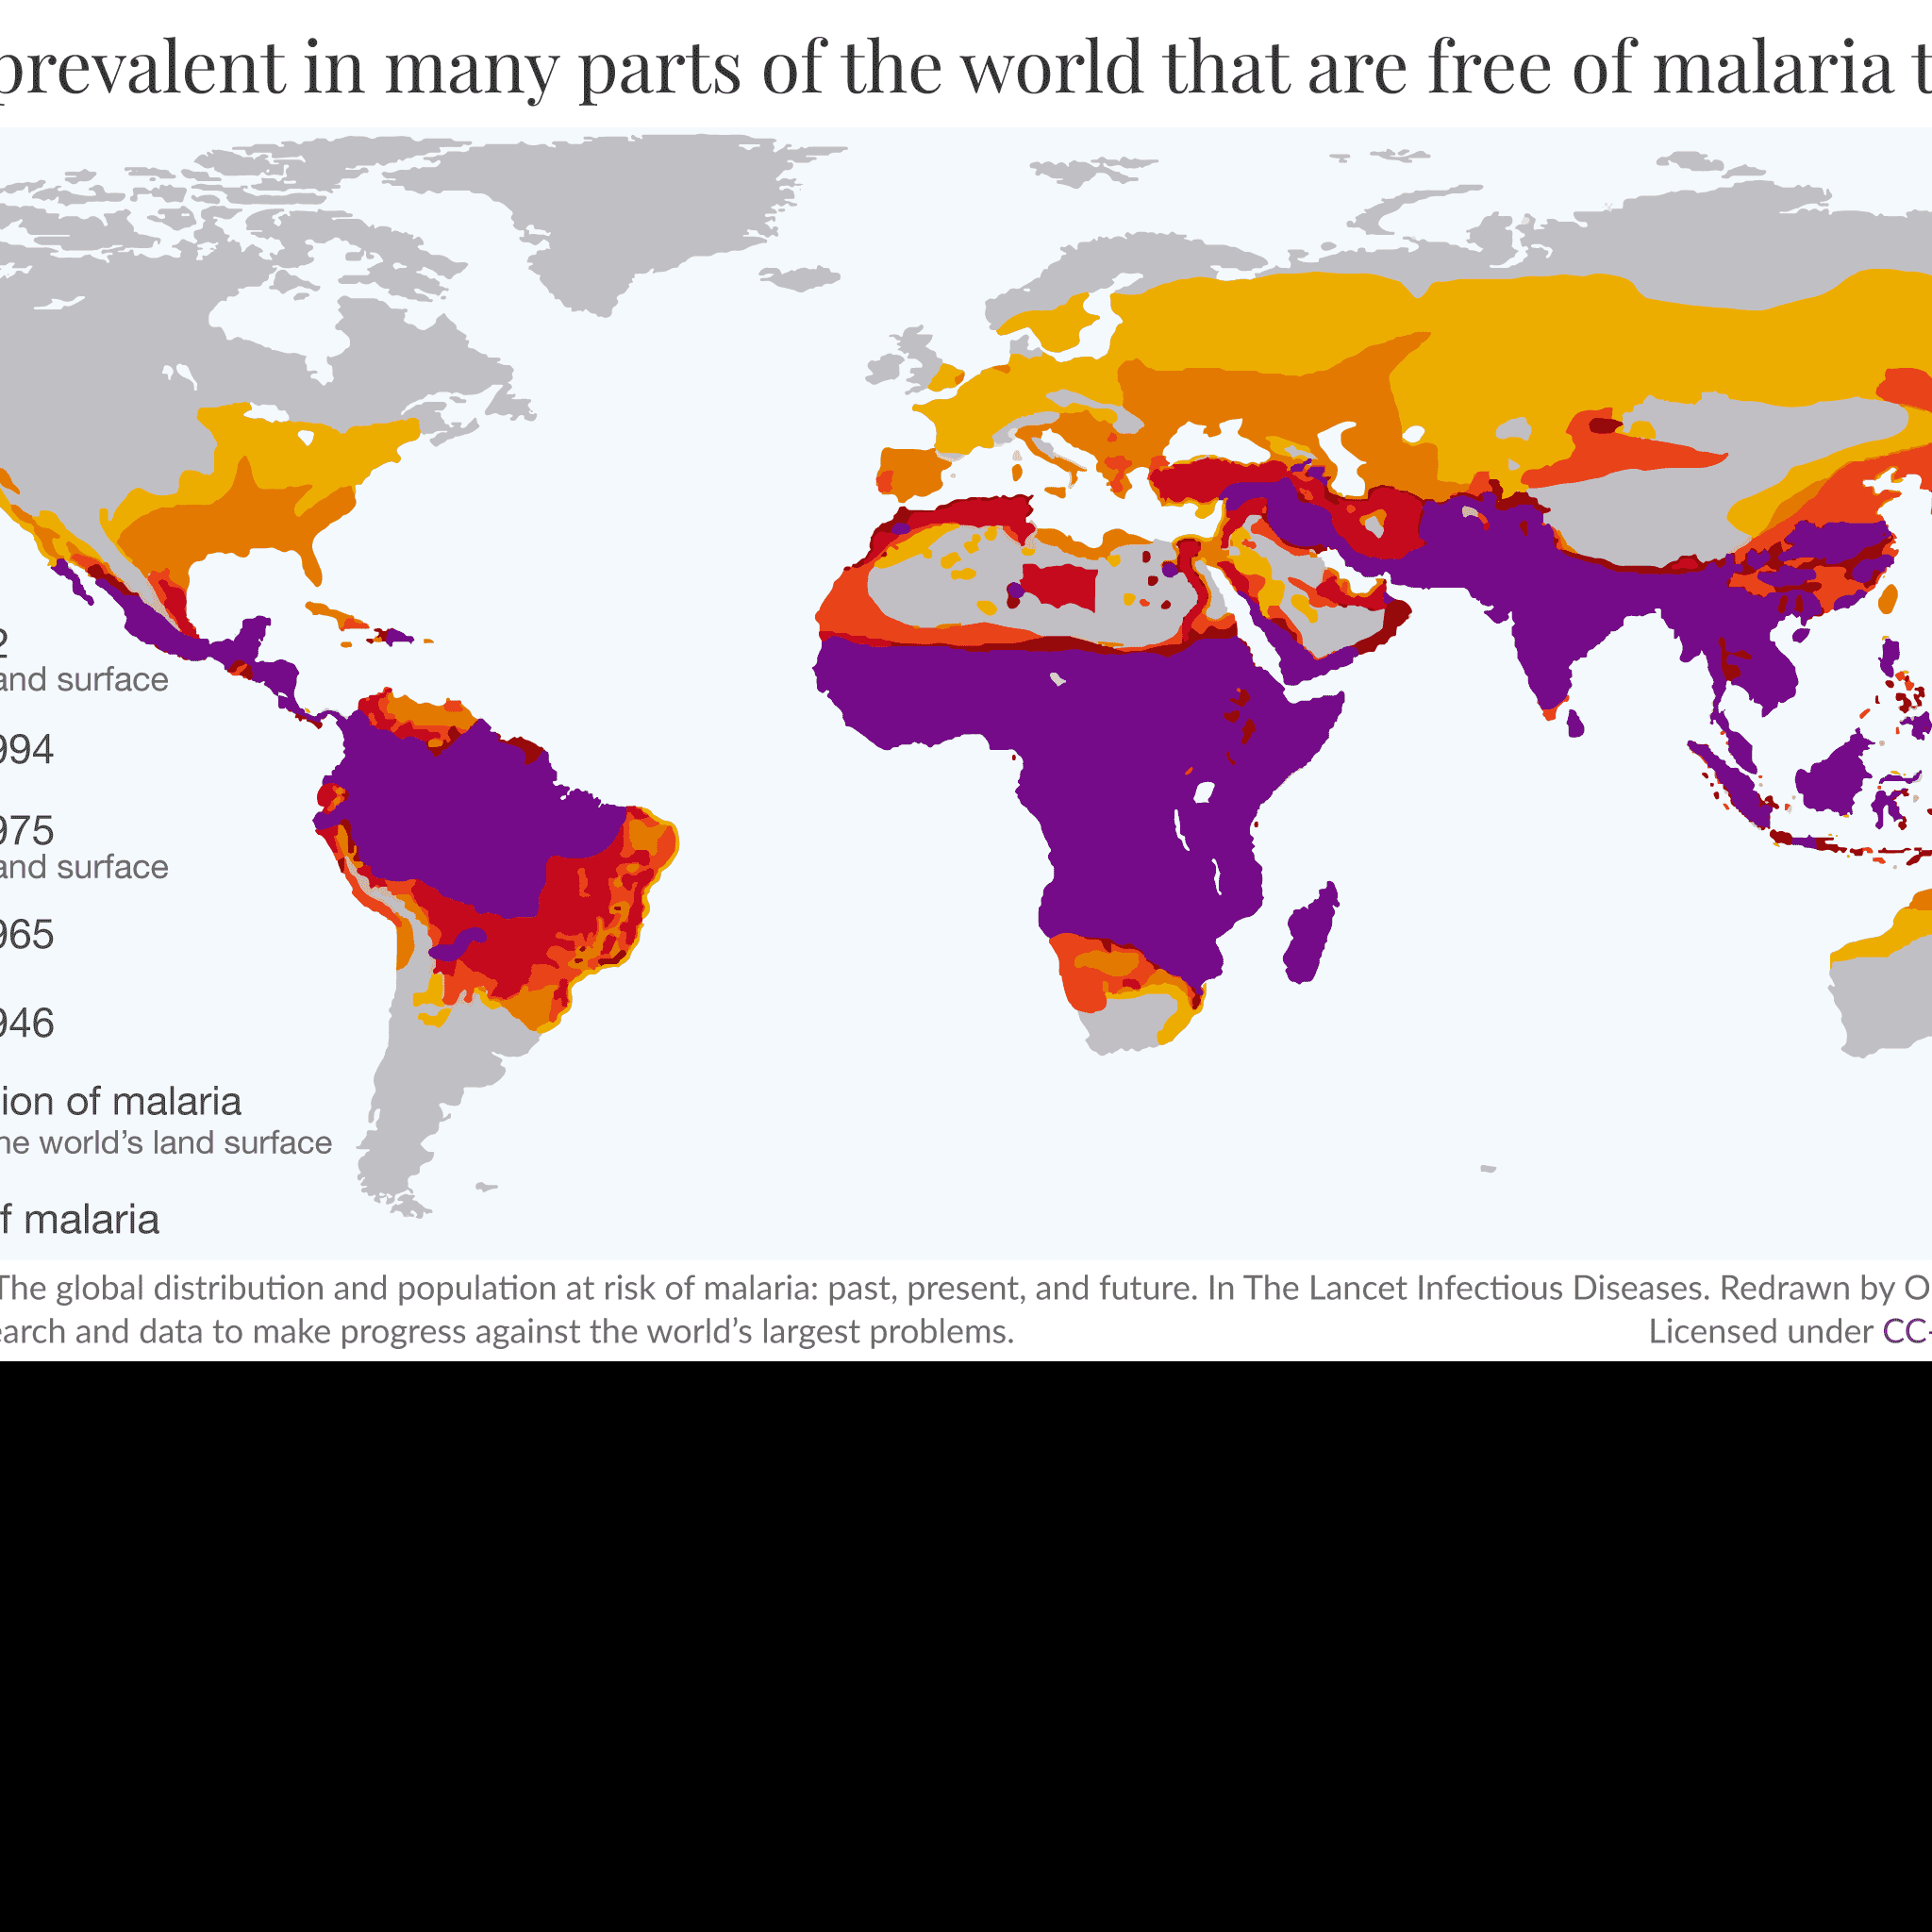 Previous-prevalence-of-malaria-world-map-1.png